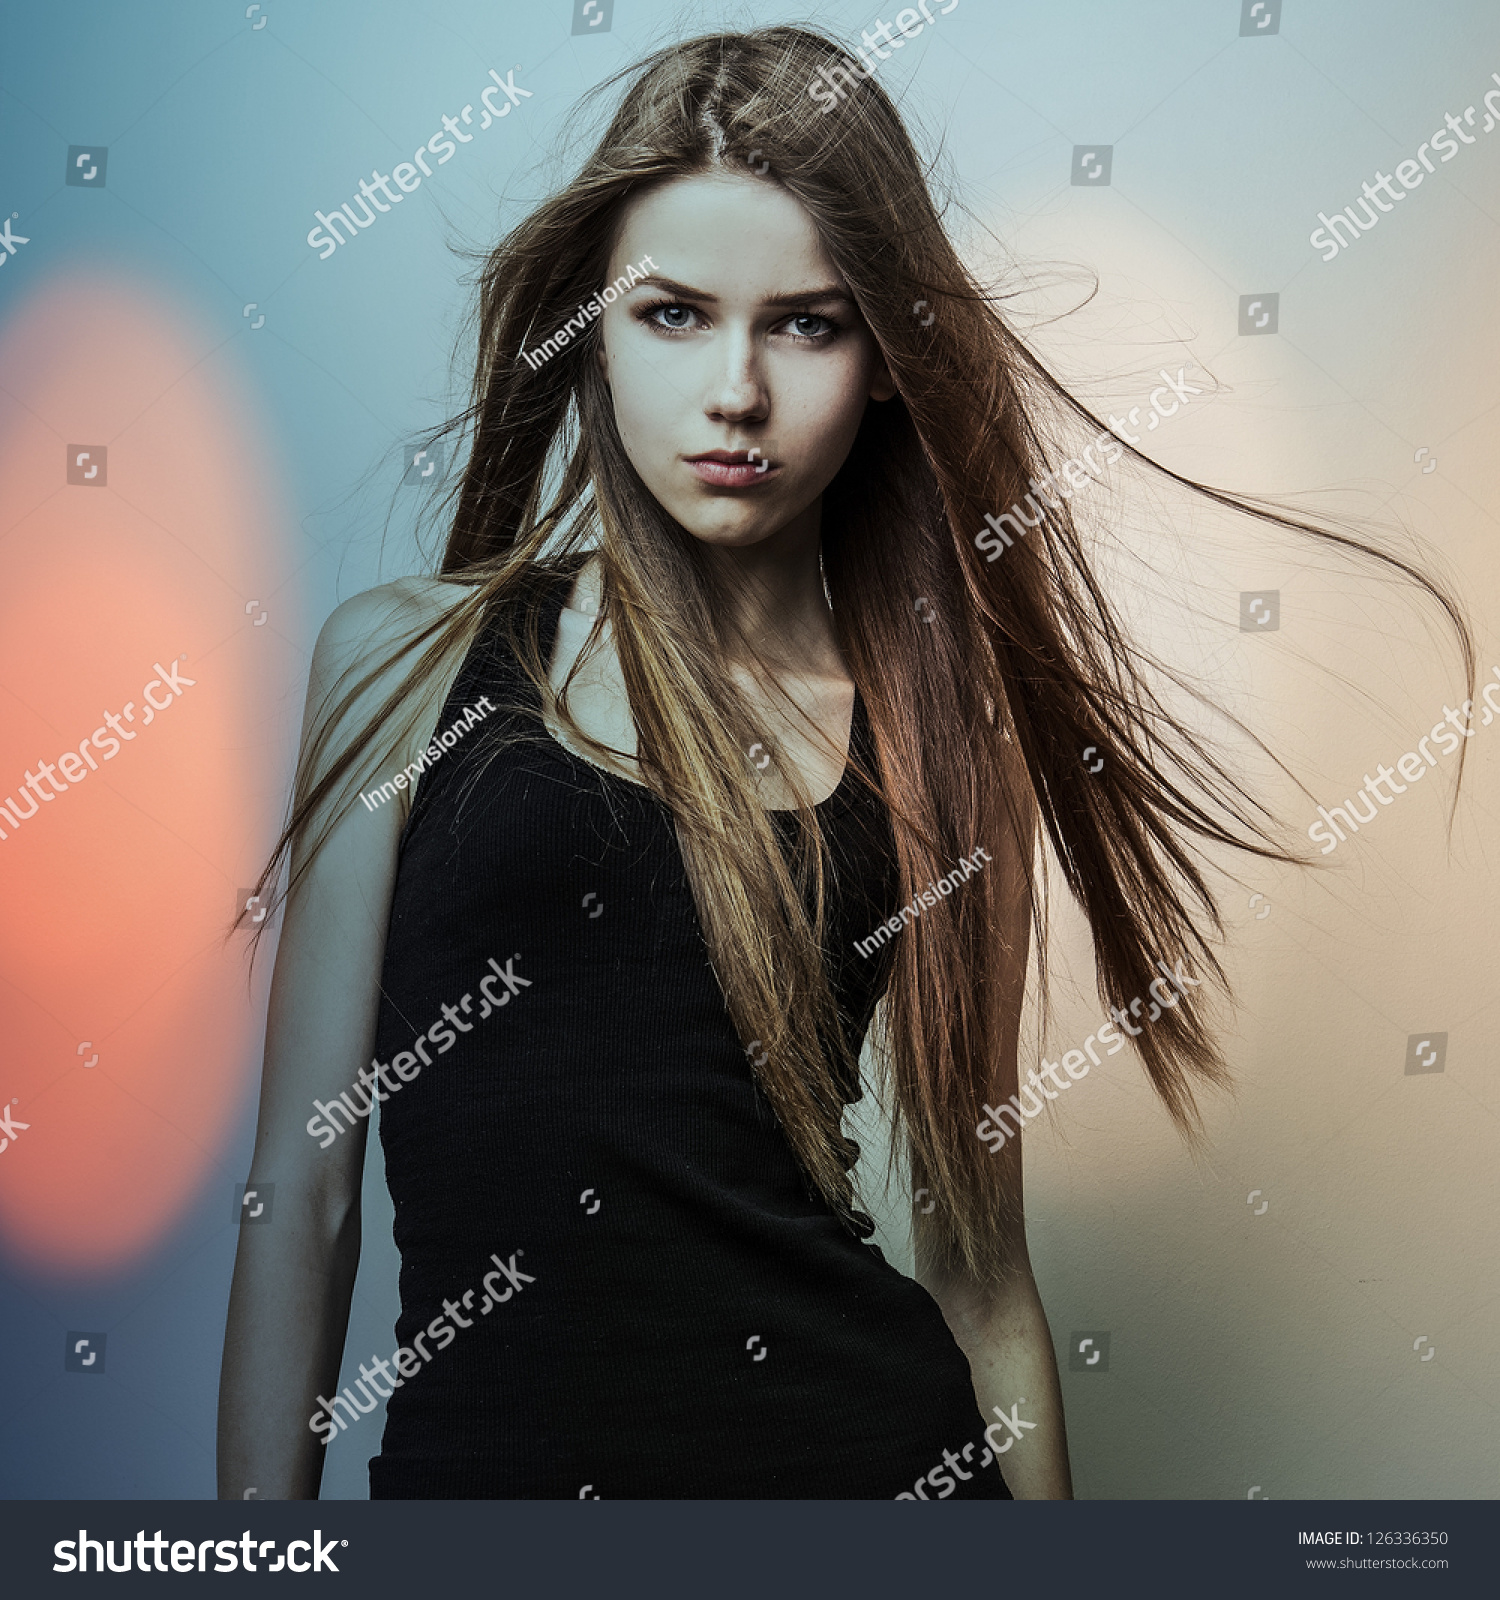 Young Sensual Model Girl Color Face Stock Photo 126336350 - Shutterstock